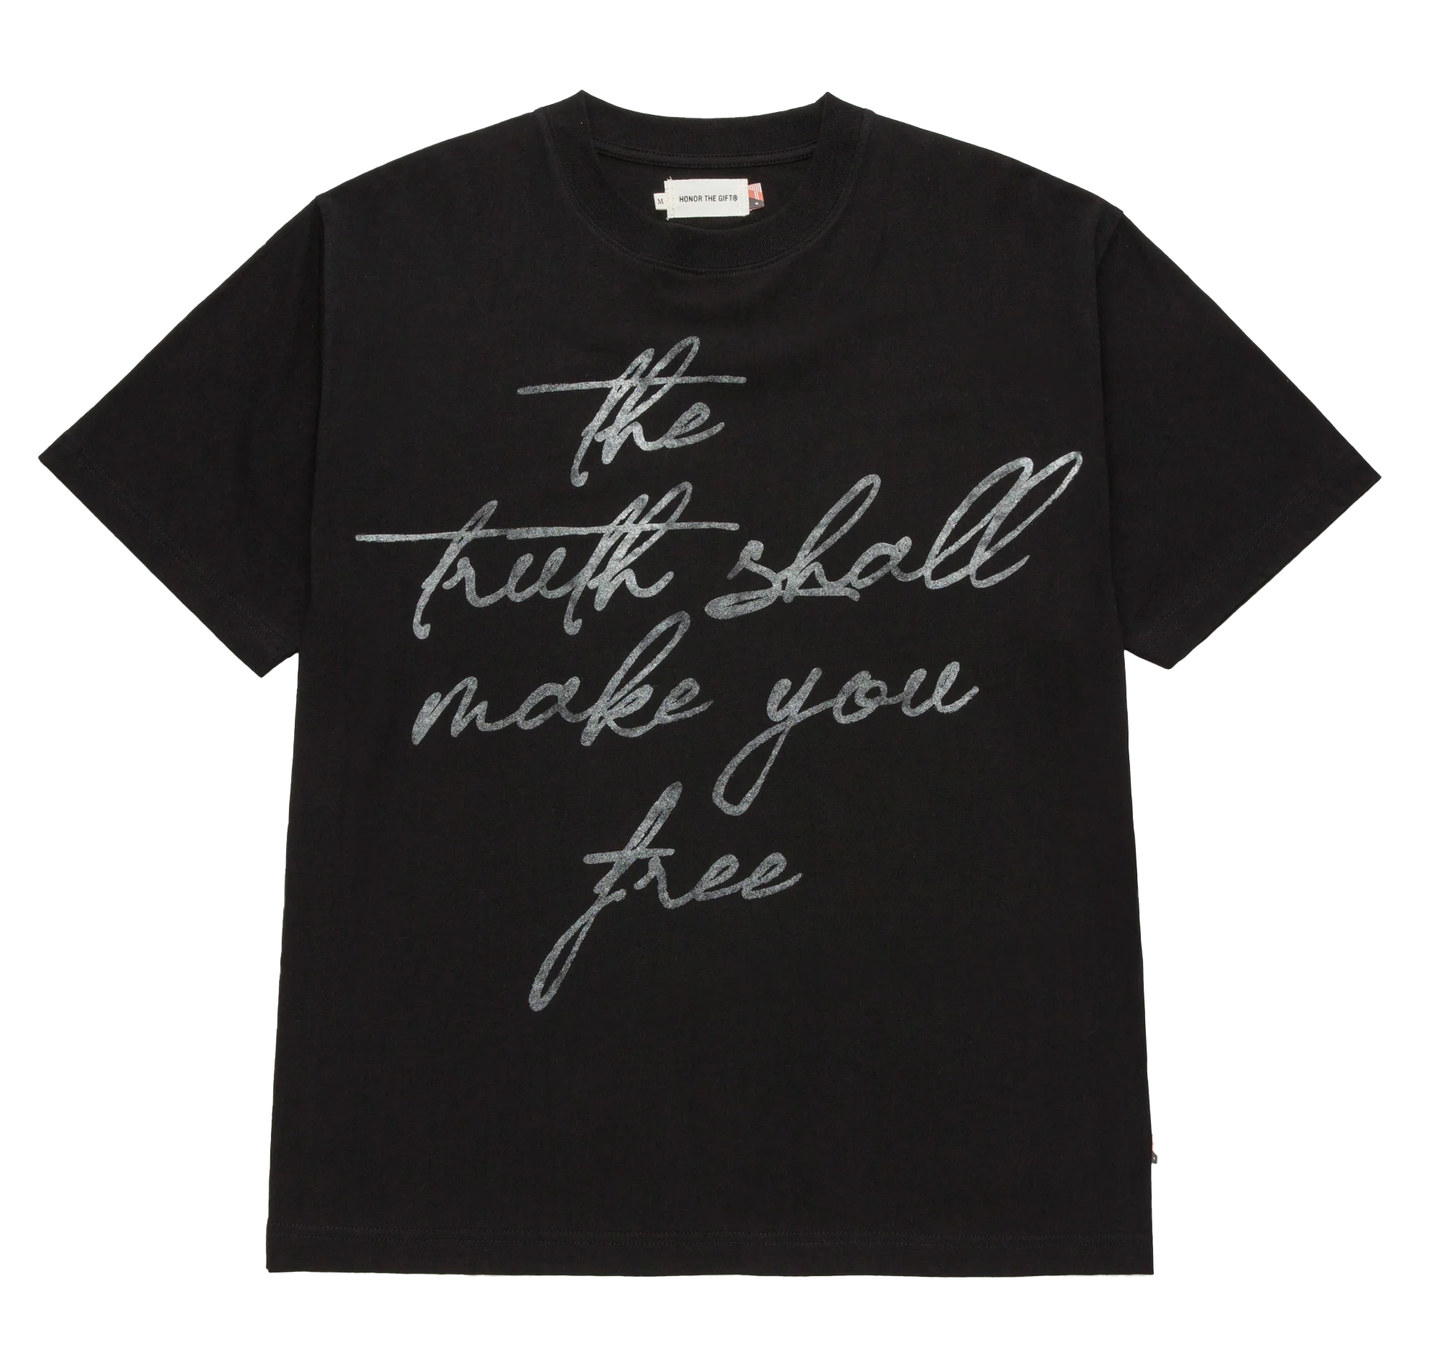 Honor The Gift Truth SS Tee - Black